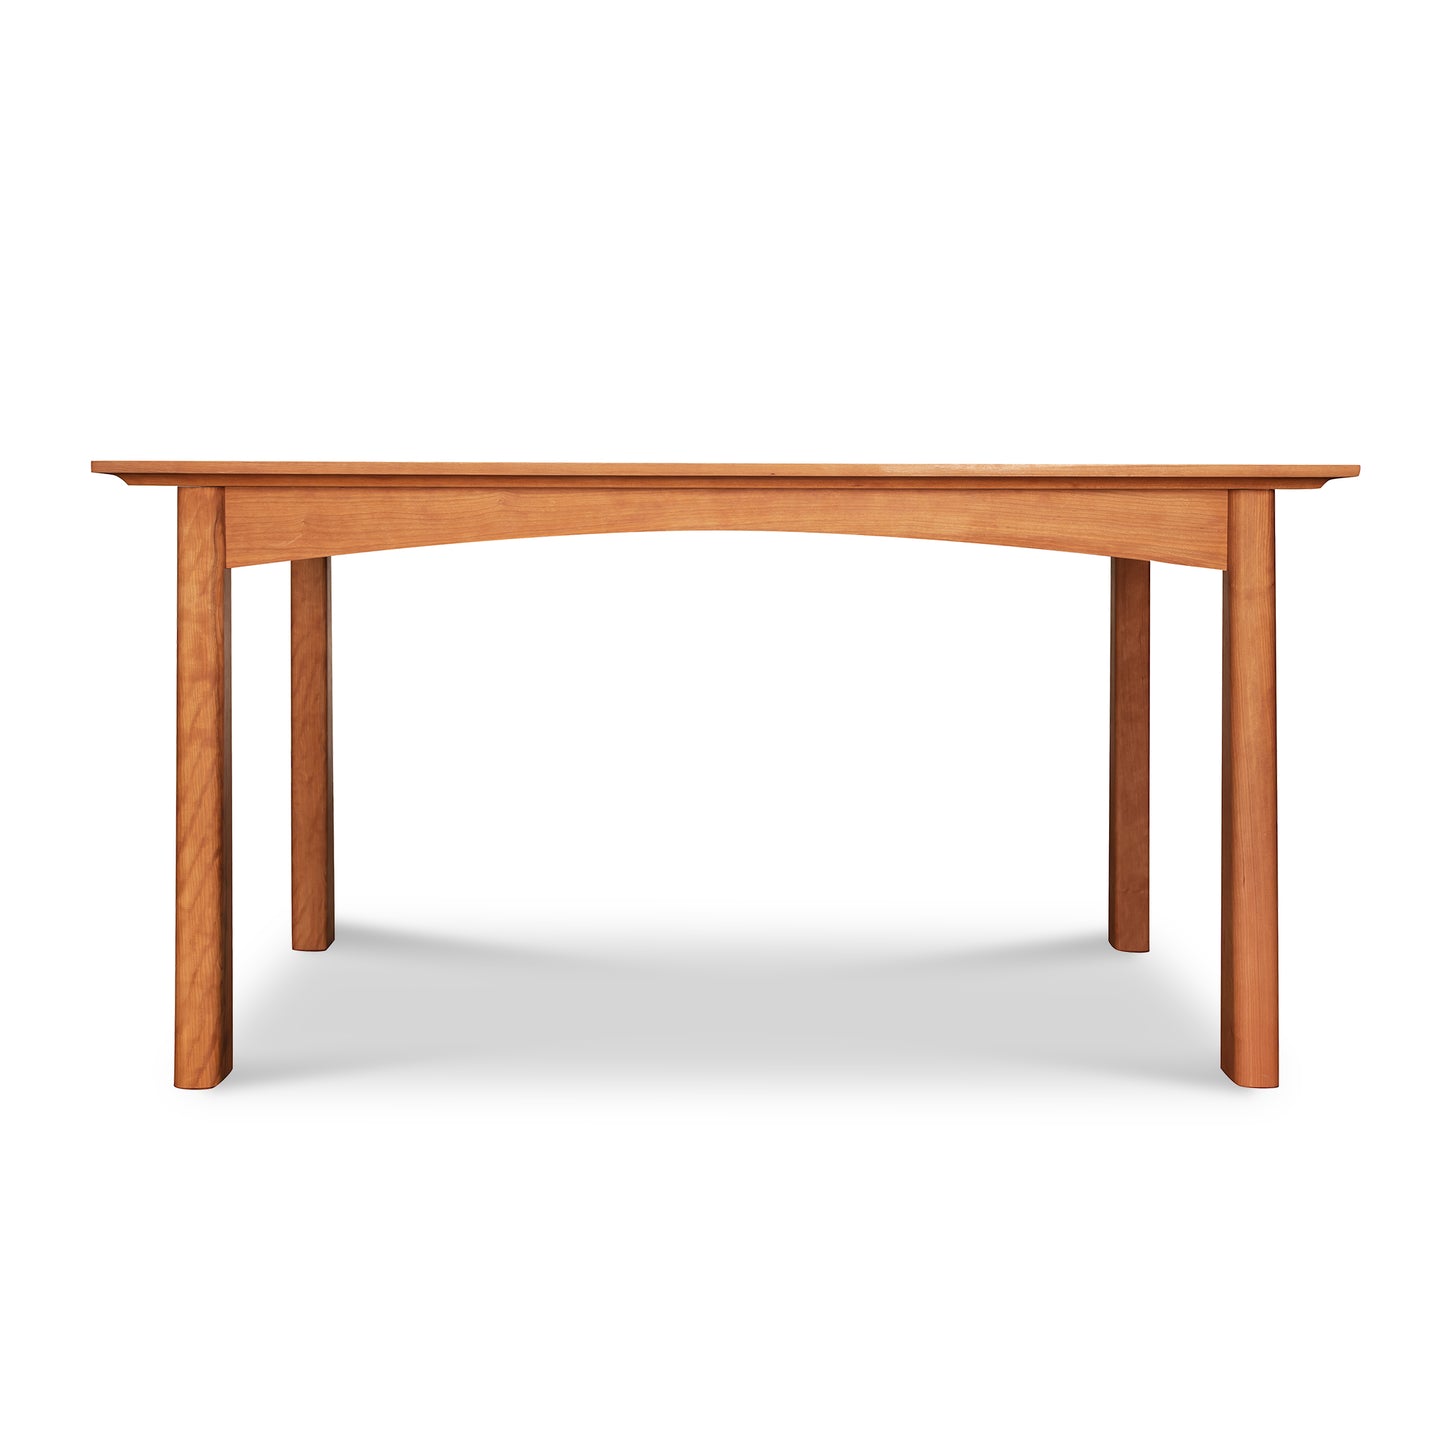 A simple Cherry Moon Solid Top Dining Table with a smooth rectangular top and four sturdy legs, set against a plain white background. The table’s natural cherry wood from Maple Corner Woodworks appears polished and reflects light softly.